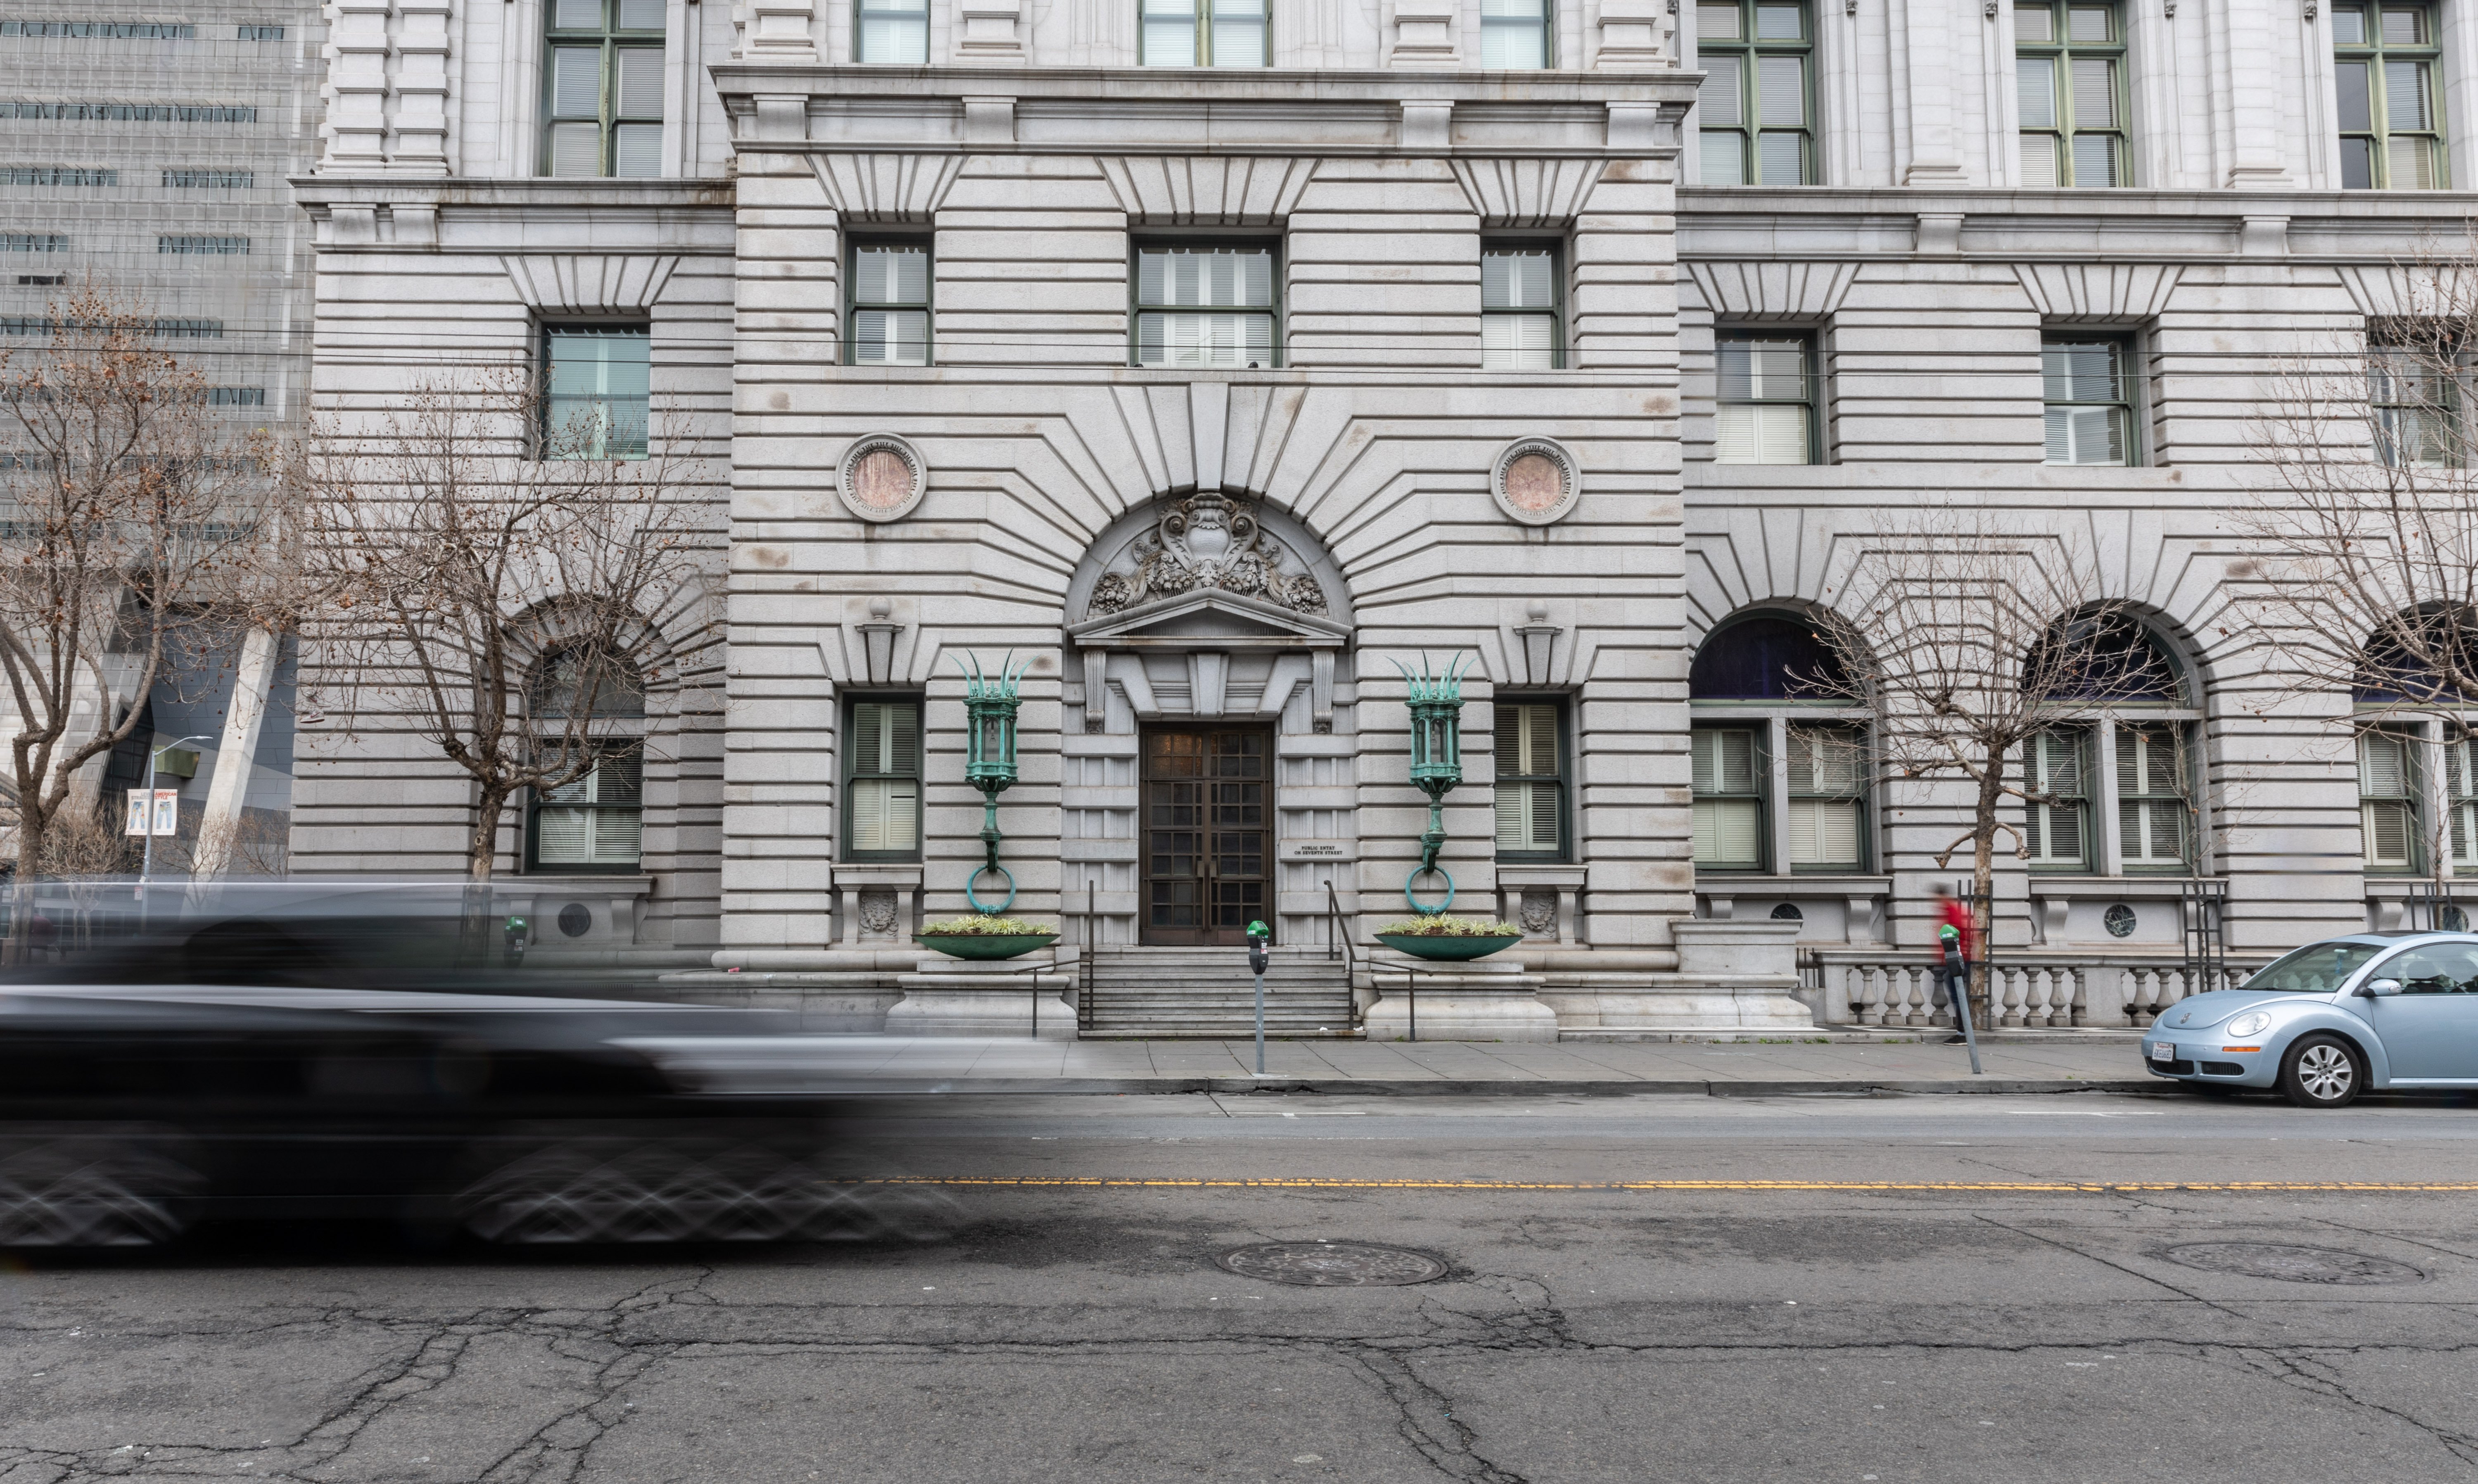 The Ninth Circuit Court of Appeals in San Francisco on March 18, 2020 a day after being closed to many court opperations. (Photo: Jason Doiy/ALM)